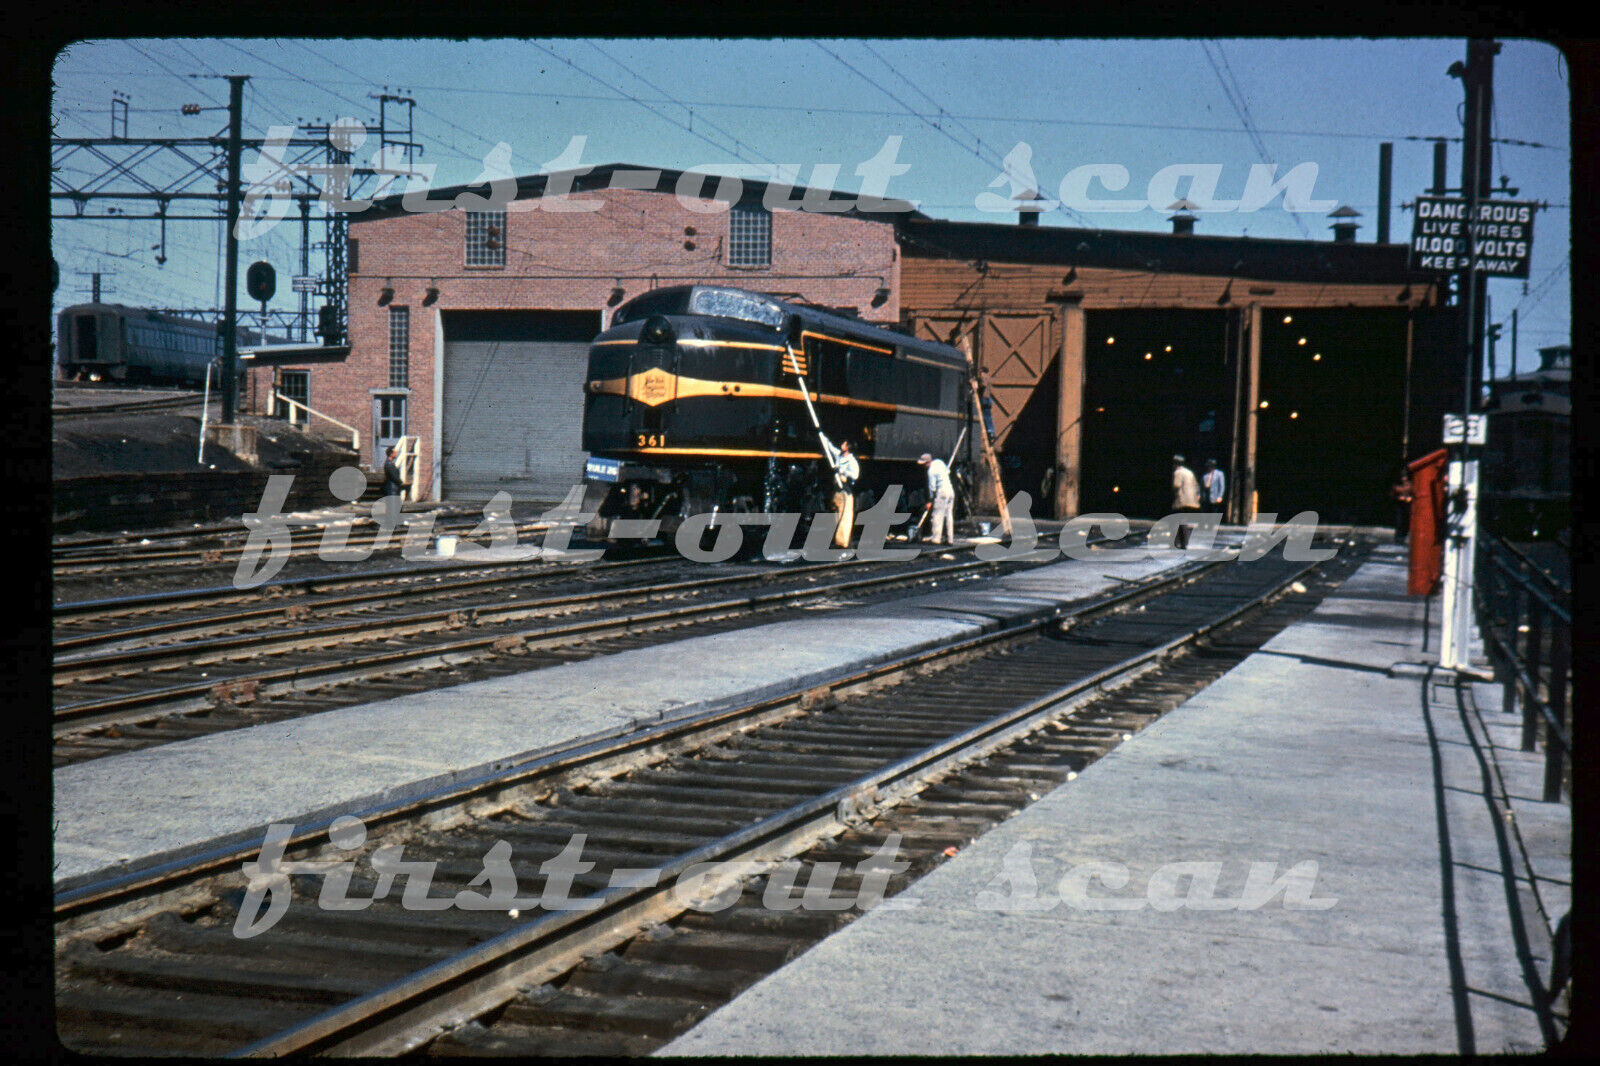 R DUPLICATE SLIDE - New Haven NH 361 Electric Being Washed Stamford CT 1956